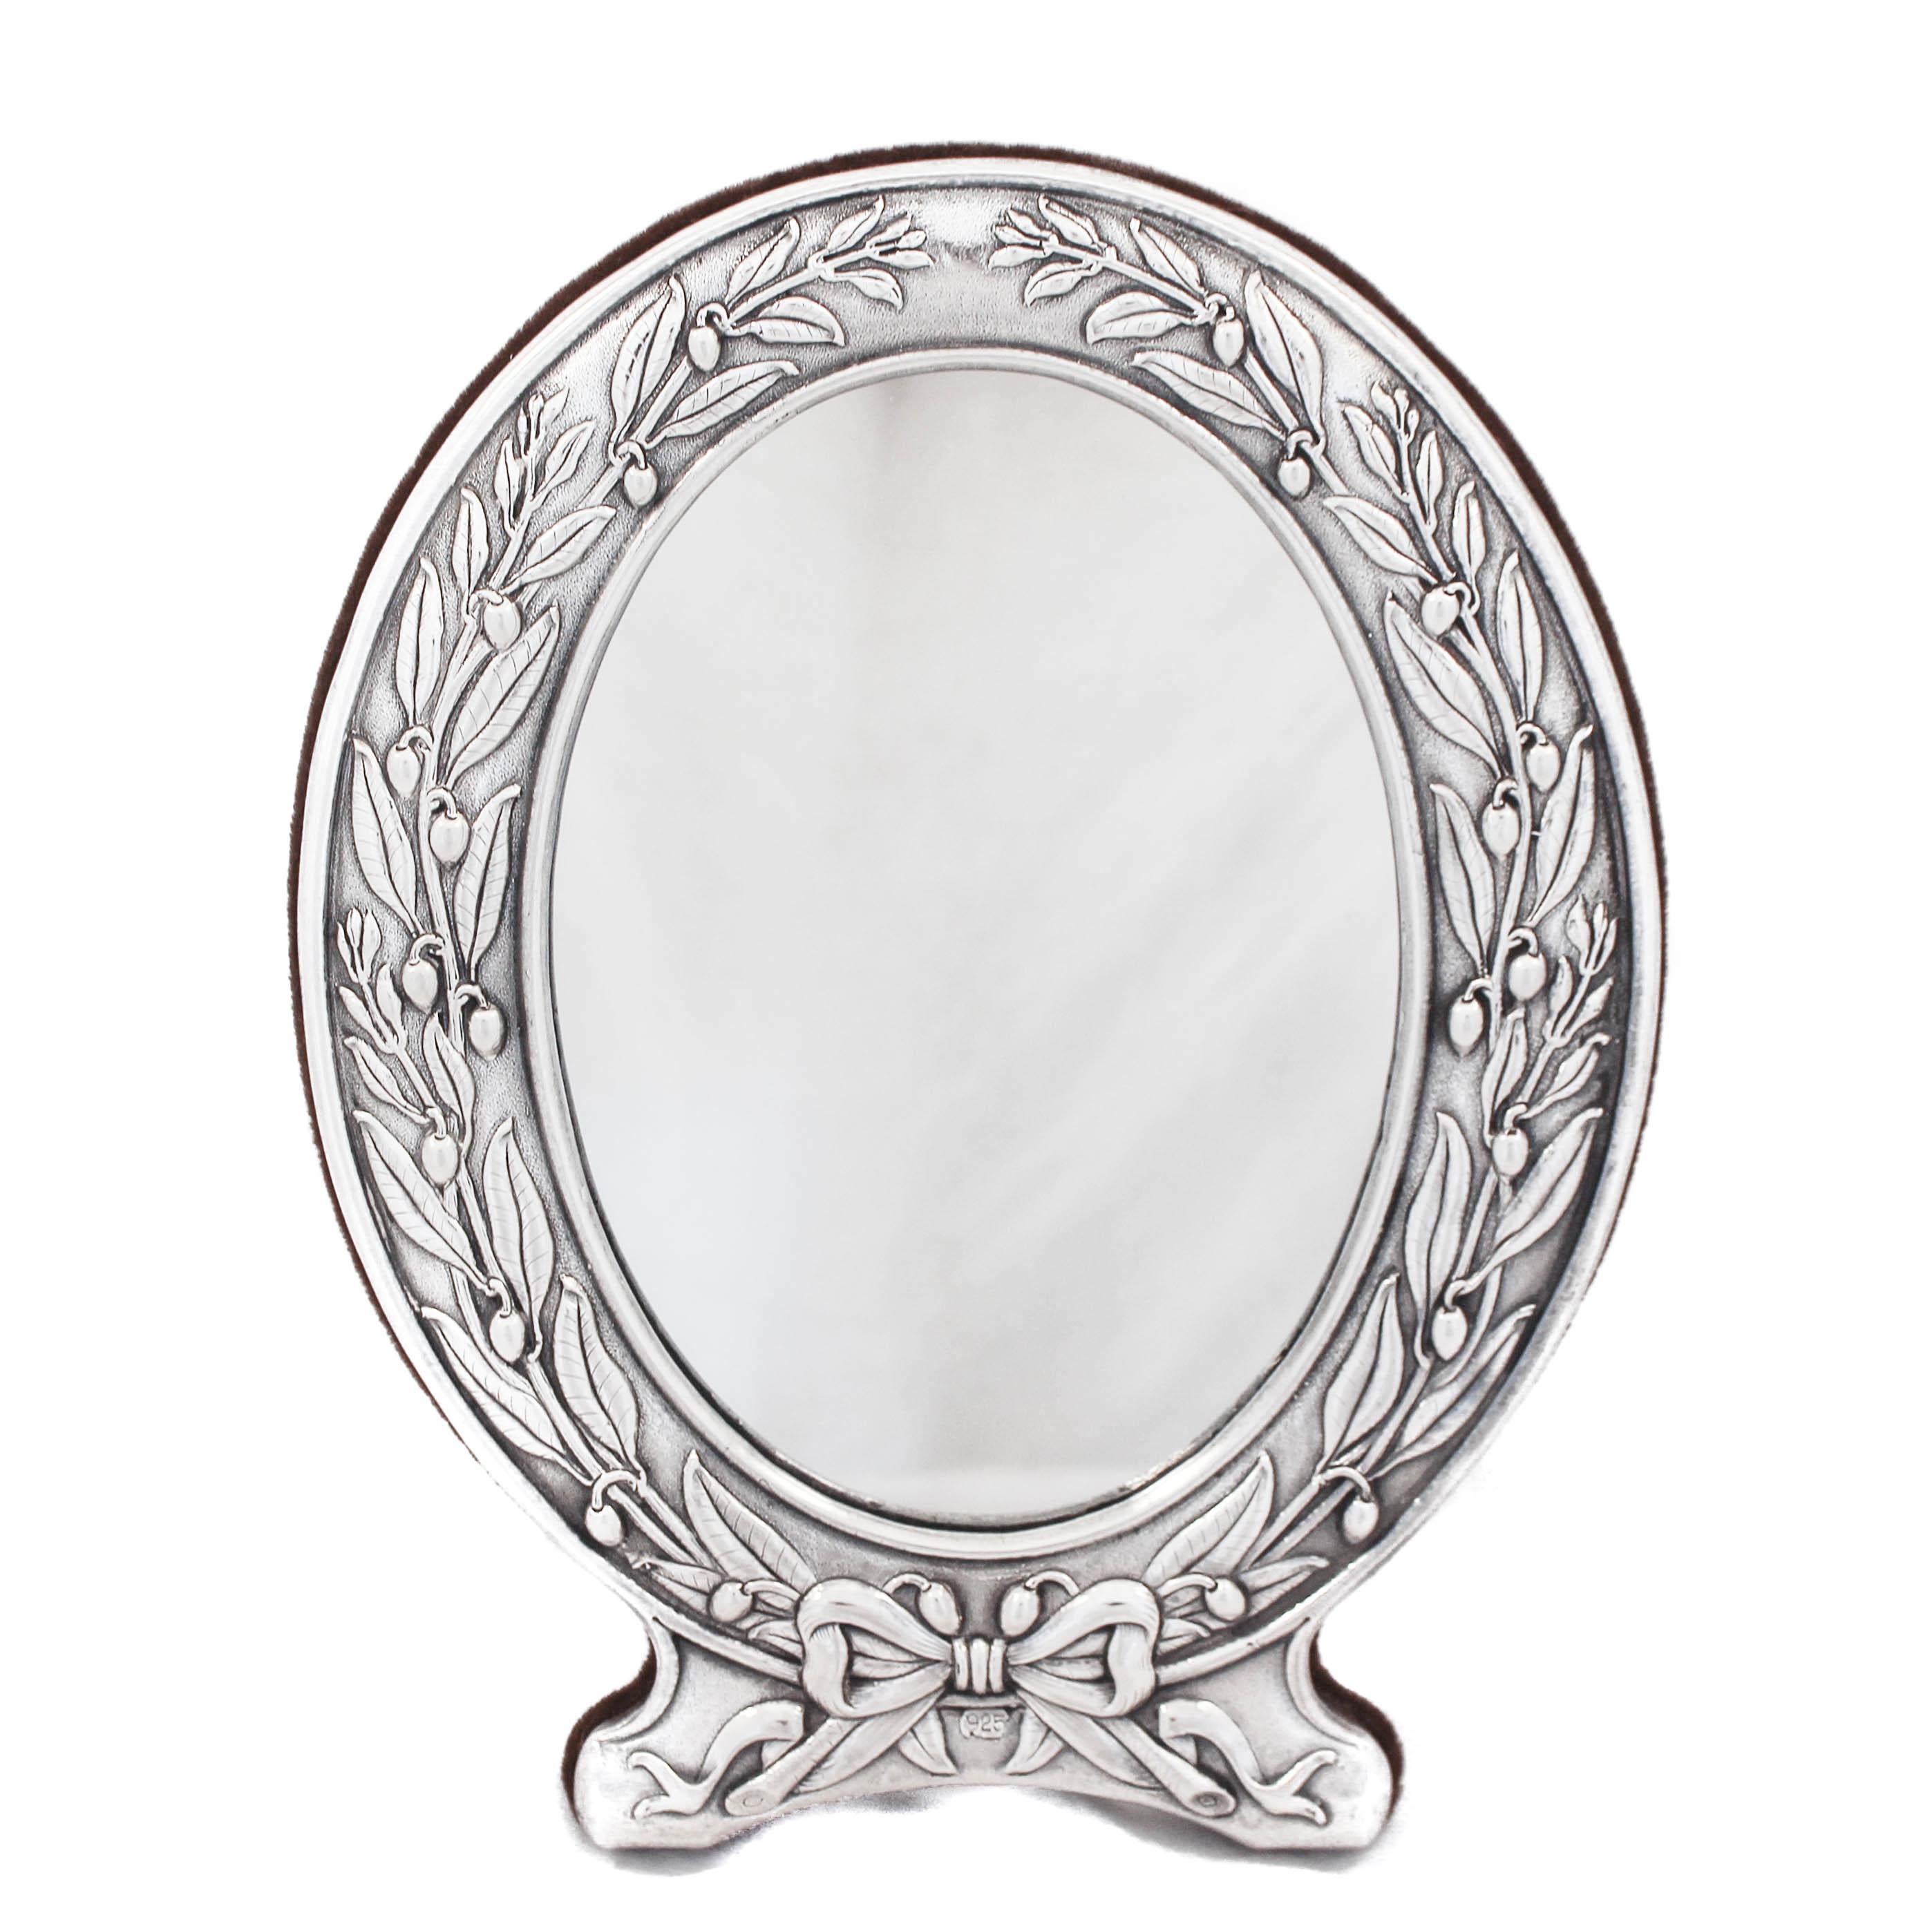 This sterling silver mirror is made in the Art Nouveau style. It is oval and has leaves and flowers going up each side. The silver has a matte finish and is “parentheses” to the mirror. On the bottom there’s a bow tying the two sides together. The